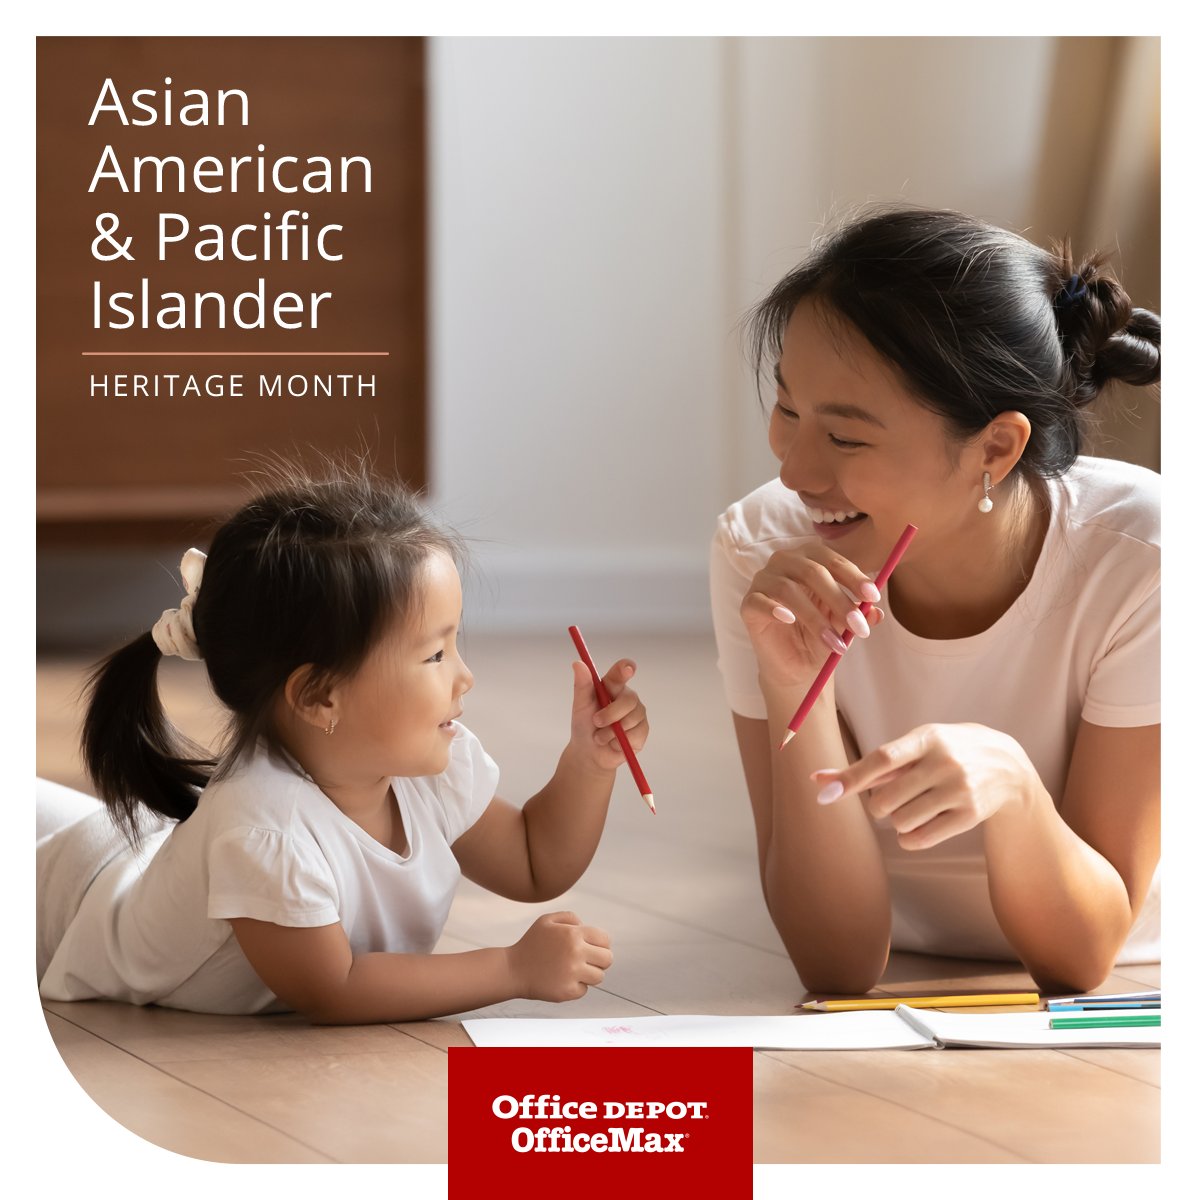 We recognize and commemorate the contributions and achievements that generations of Asian Americans and Pacific Islanders have had in influencing, elevating and defining our country. We celebrate their unique backgrounds, cultures, ideas and experiences. bit.ly/3UTLm03